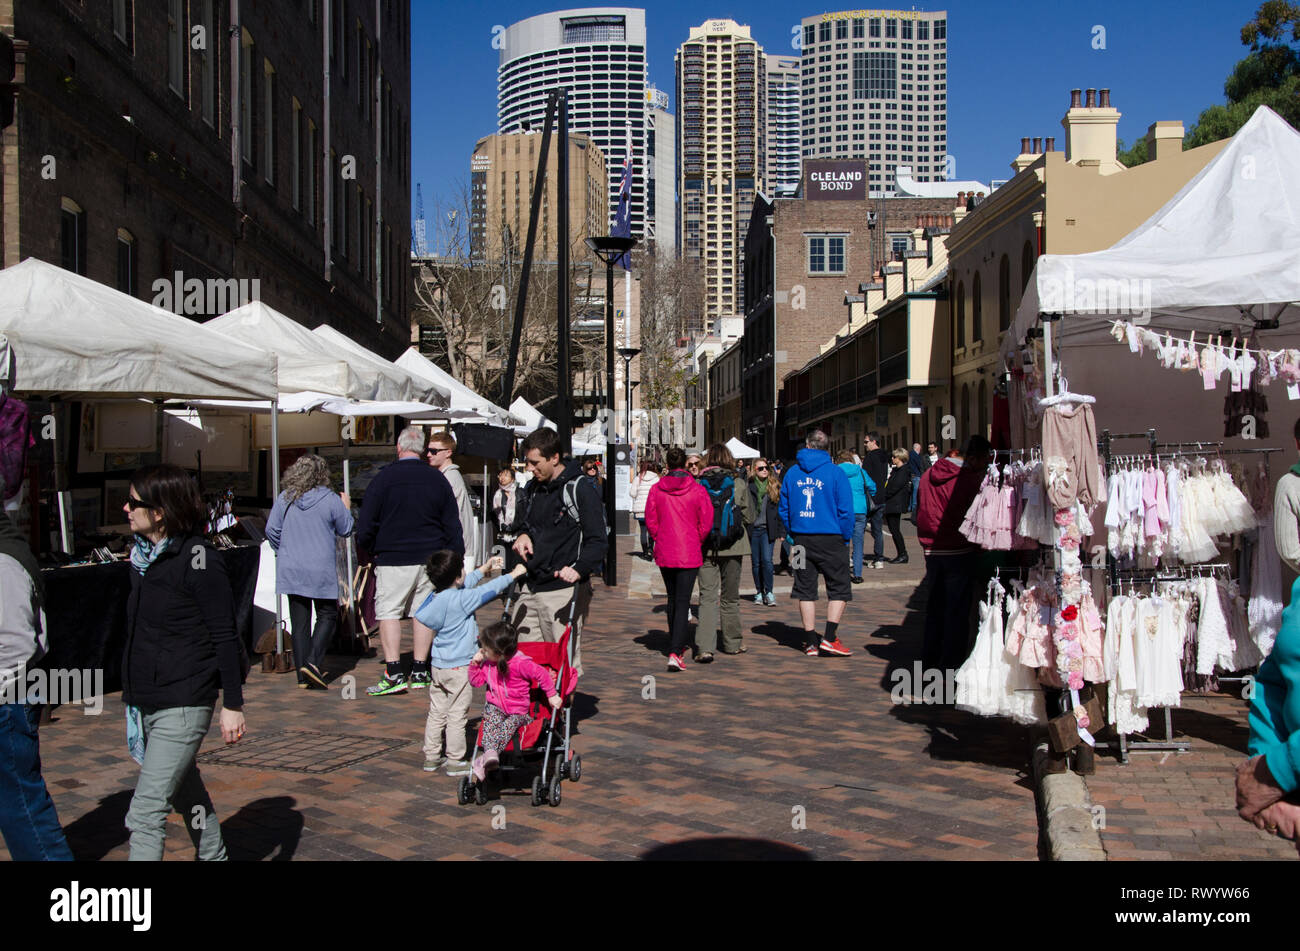 A market in Sydneys historical urban district. Stock Photo